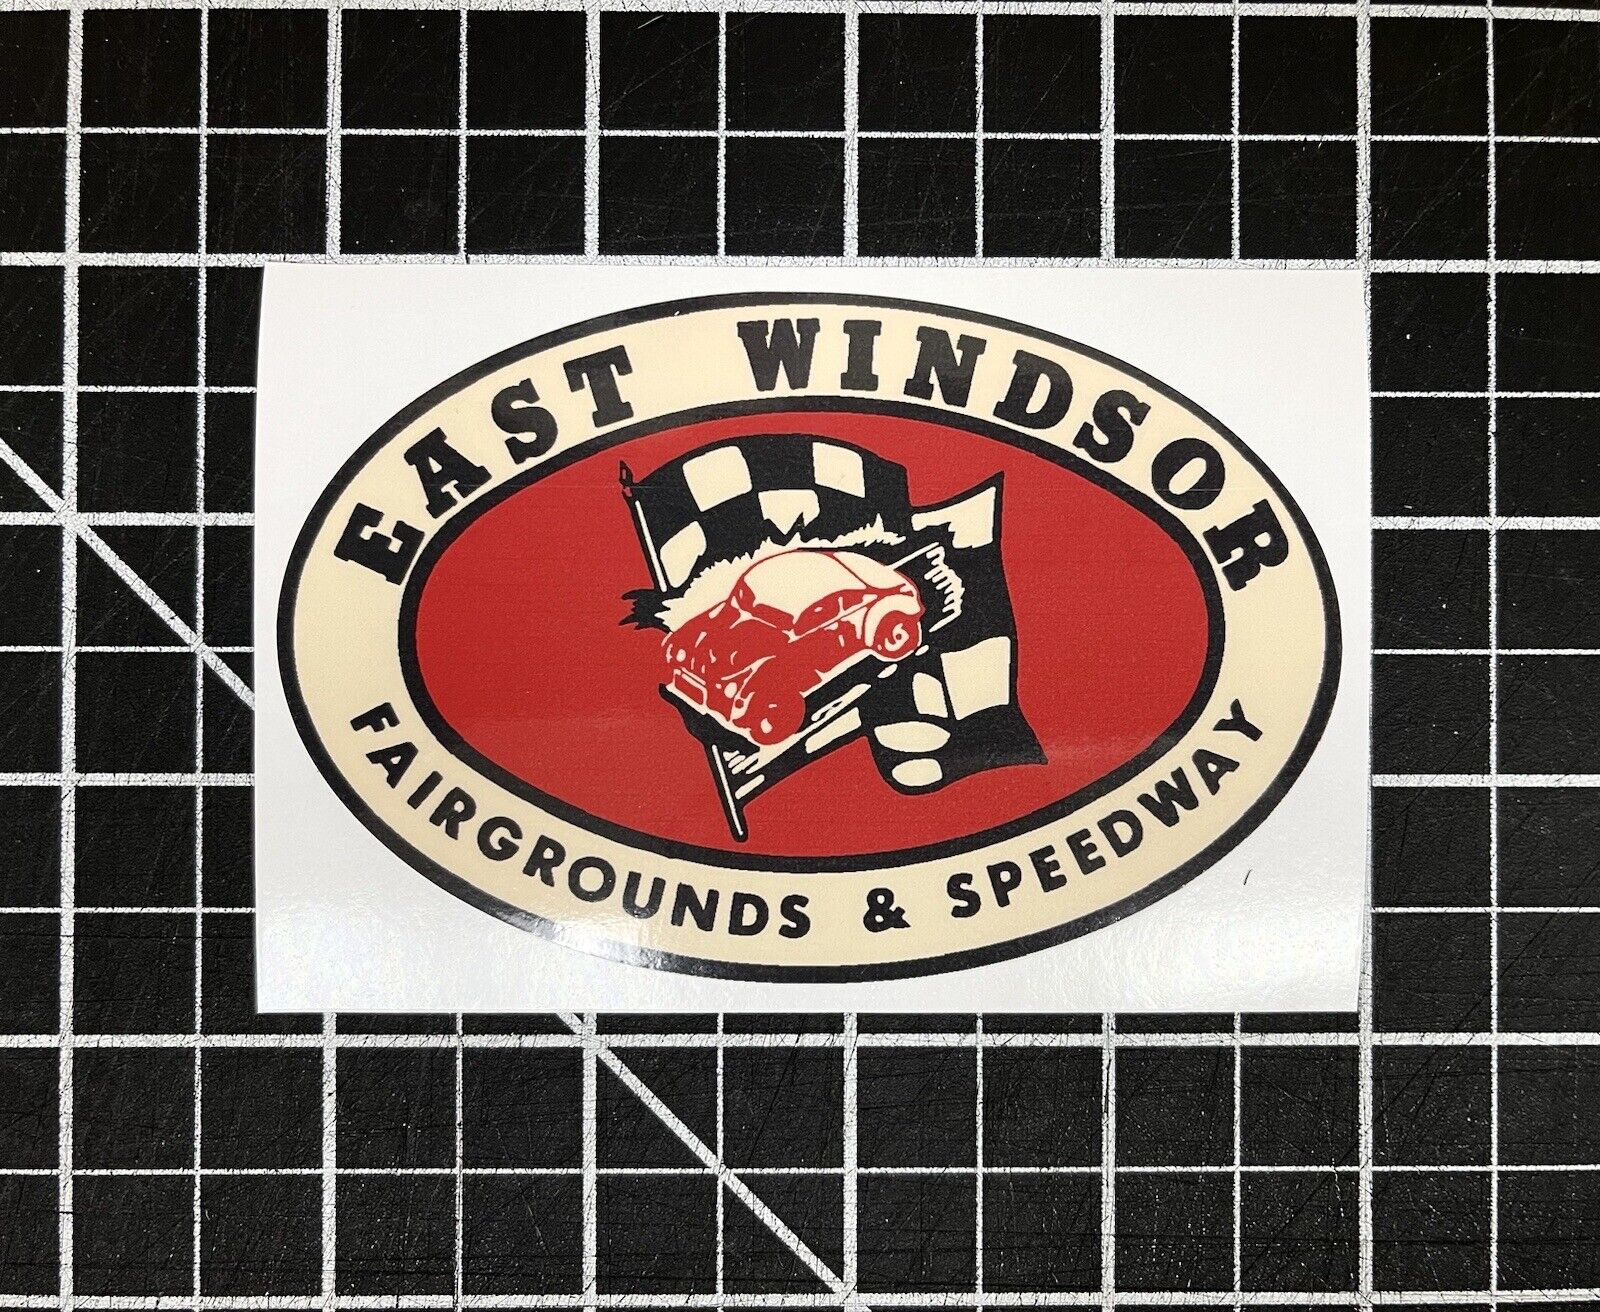 EAST WINDSOR Speedway - NEW Reproduction Vintage 1960's Racing Sticker Decal